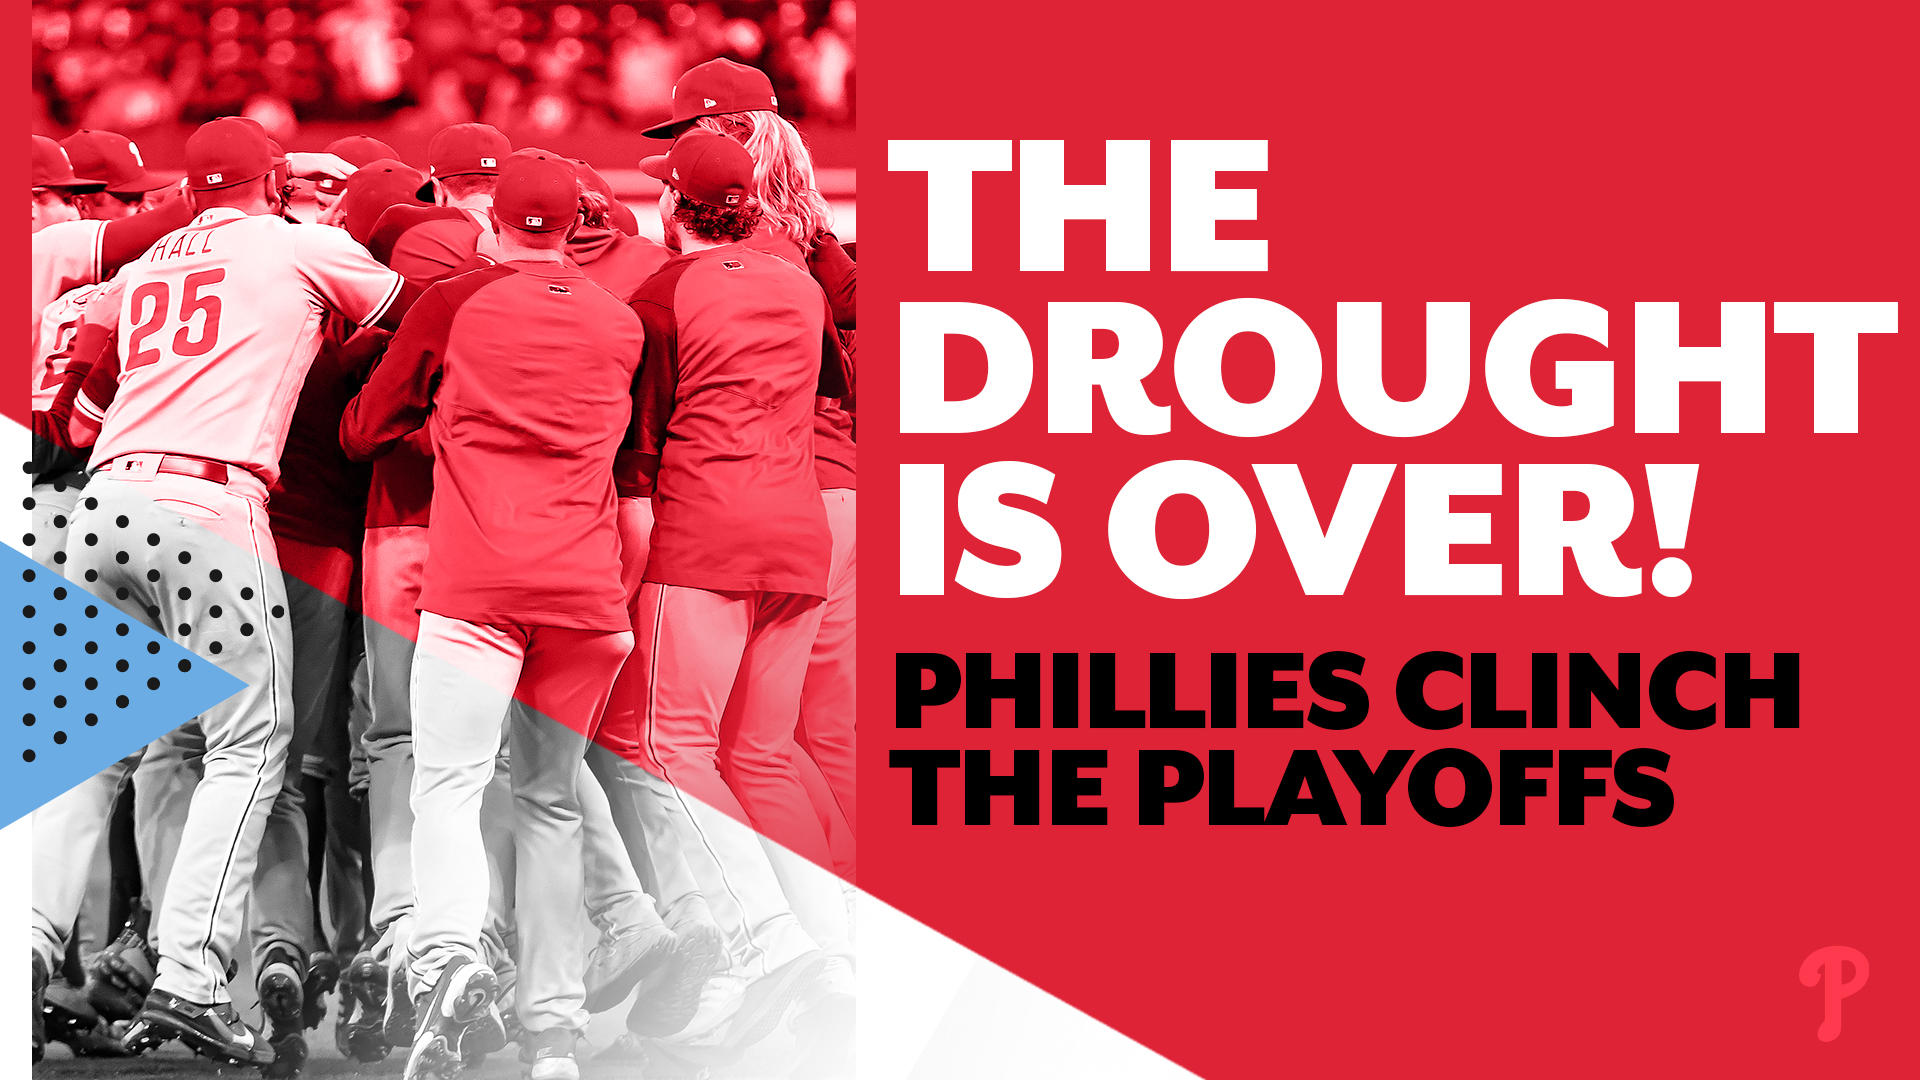 THE DROUGHT IS OVER! The Phillies Are Headed to the 2022 MLB